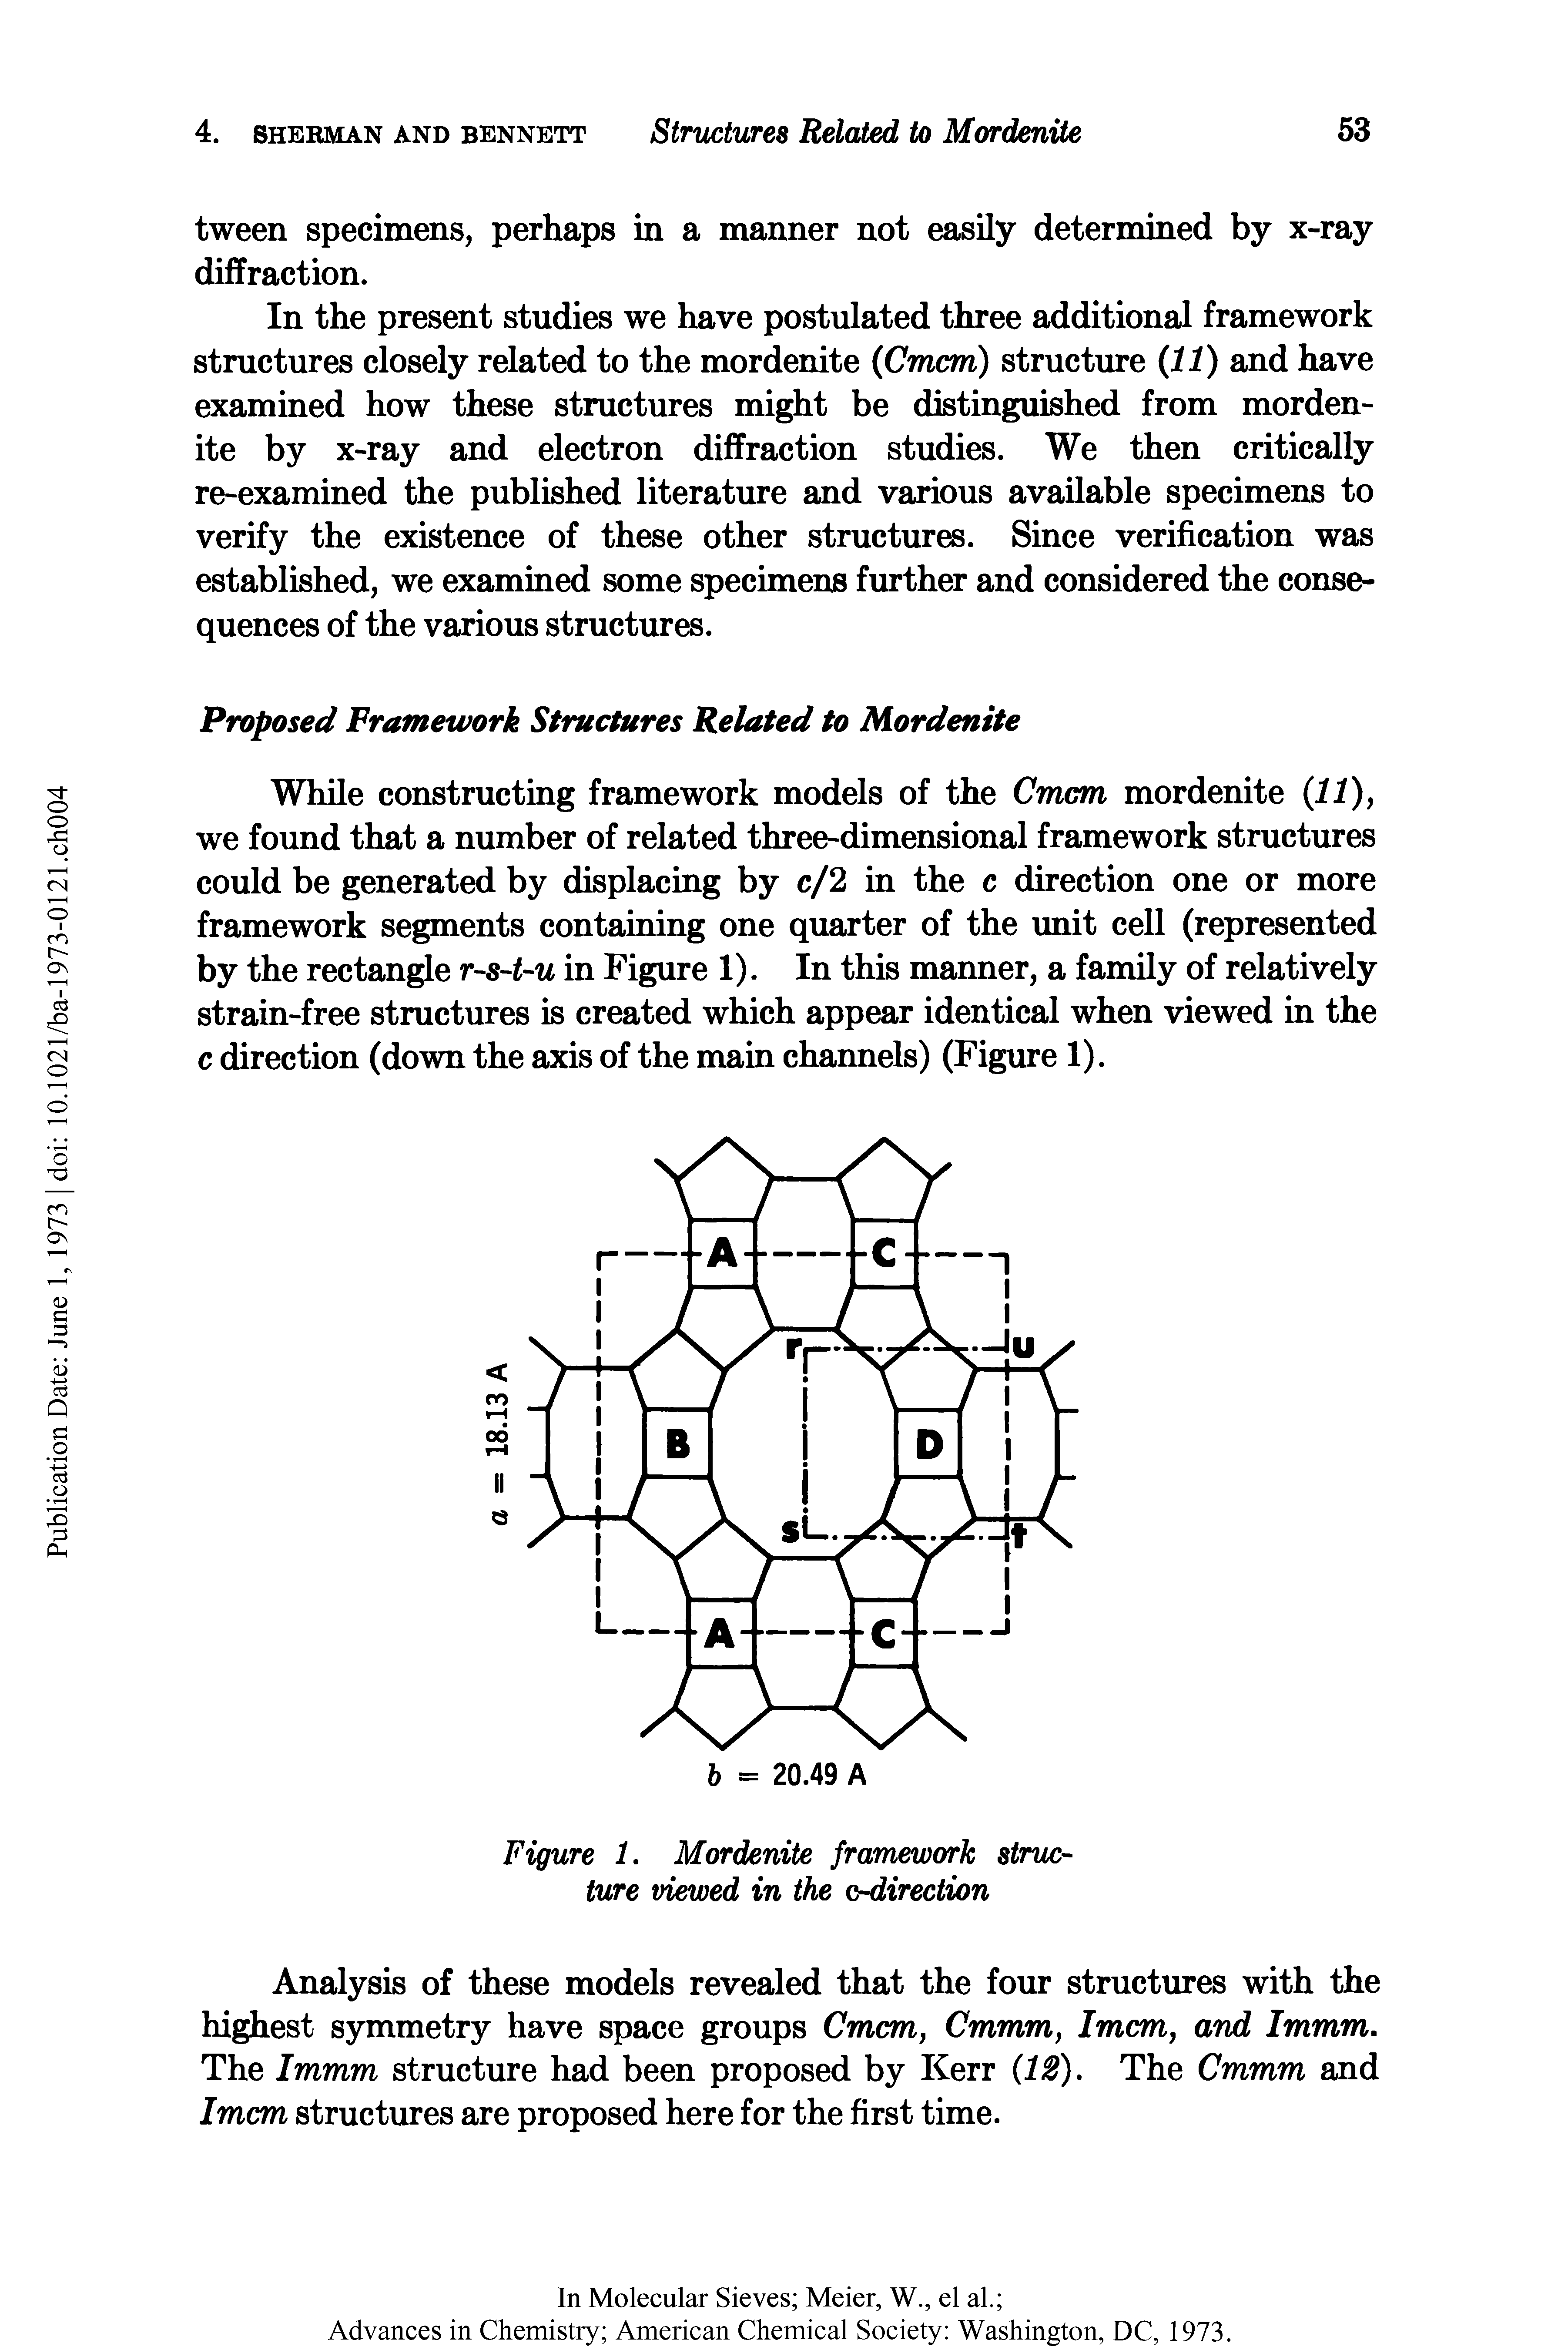 Figure 1. Mordenite framework structure viewed in the crdirection...